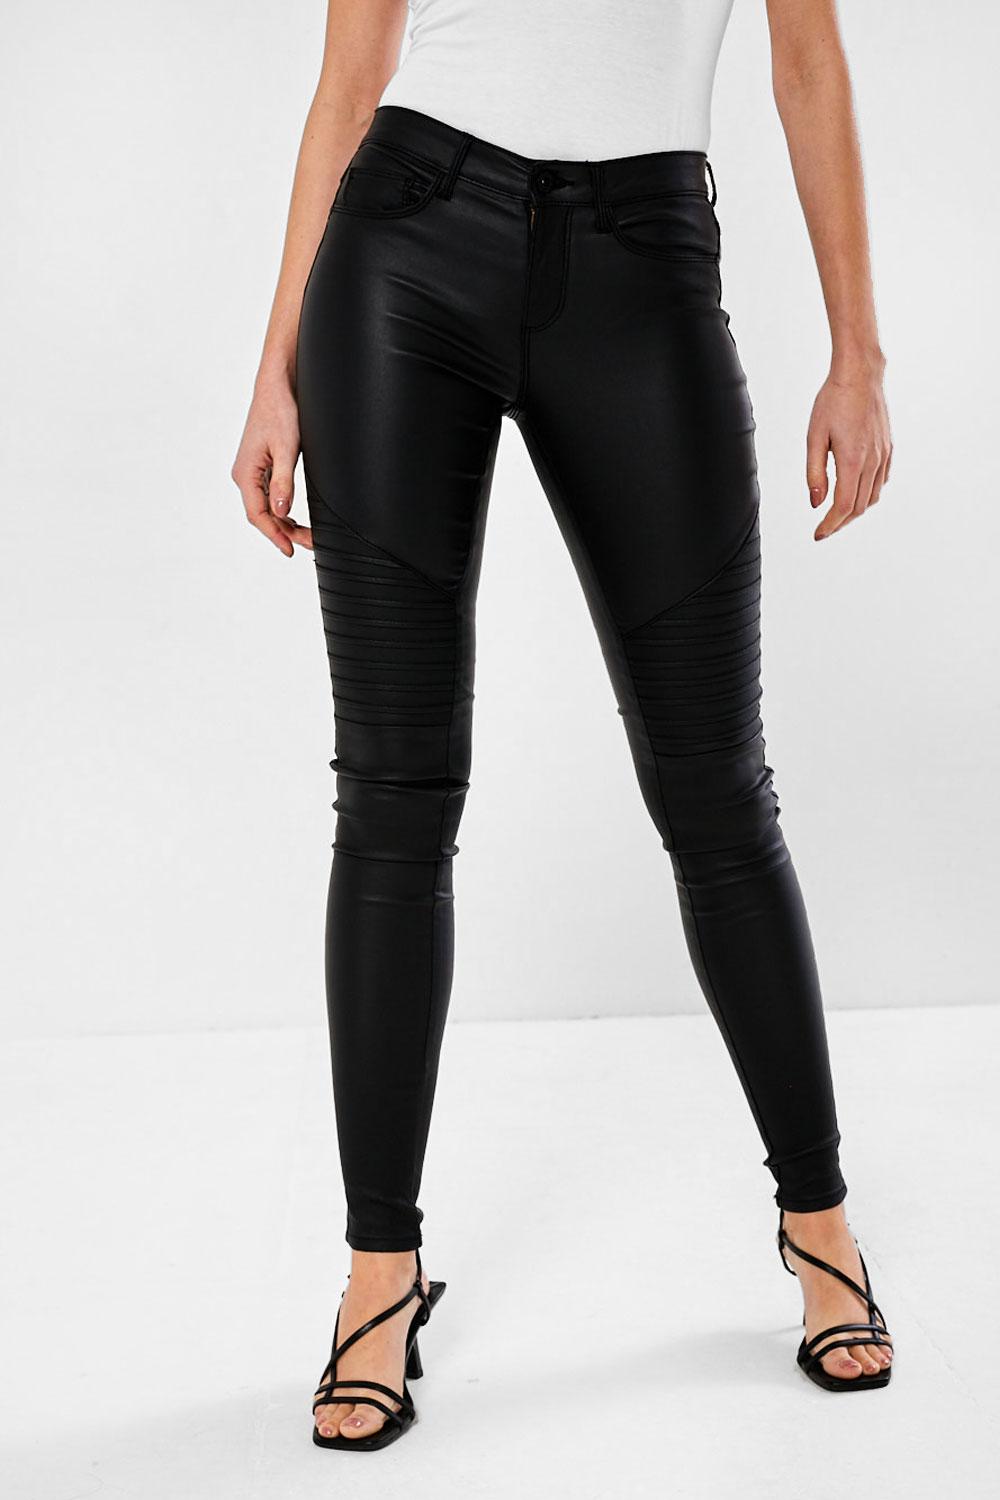 Only Royal Biker Coated Jeans in Black | iCLOTHING - iCLOTHING